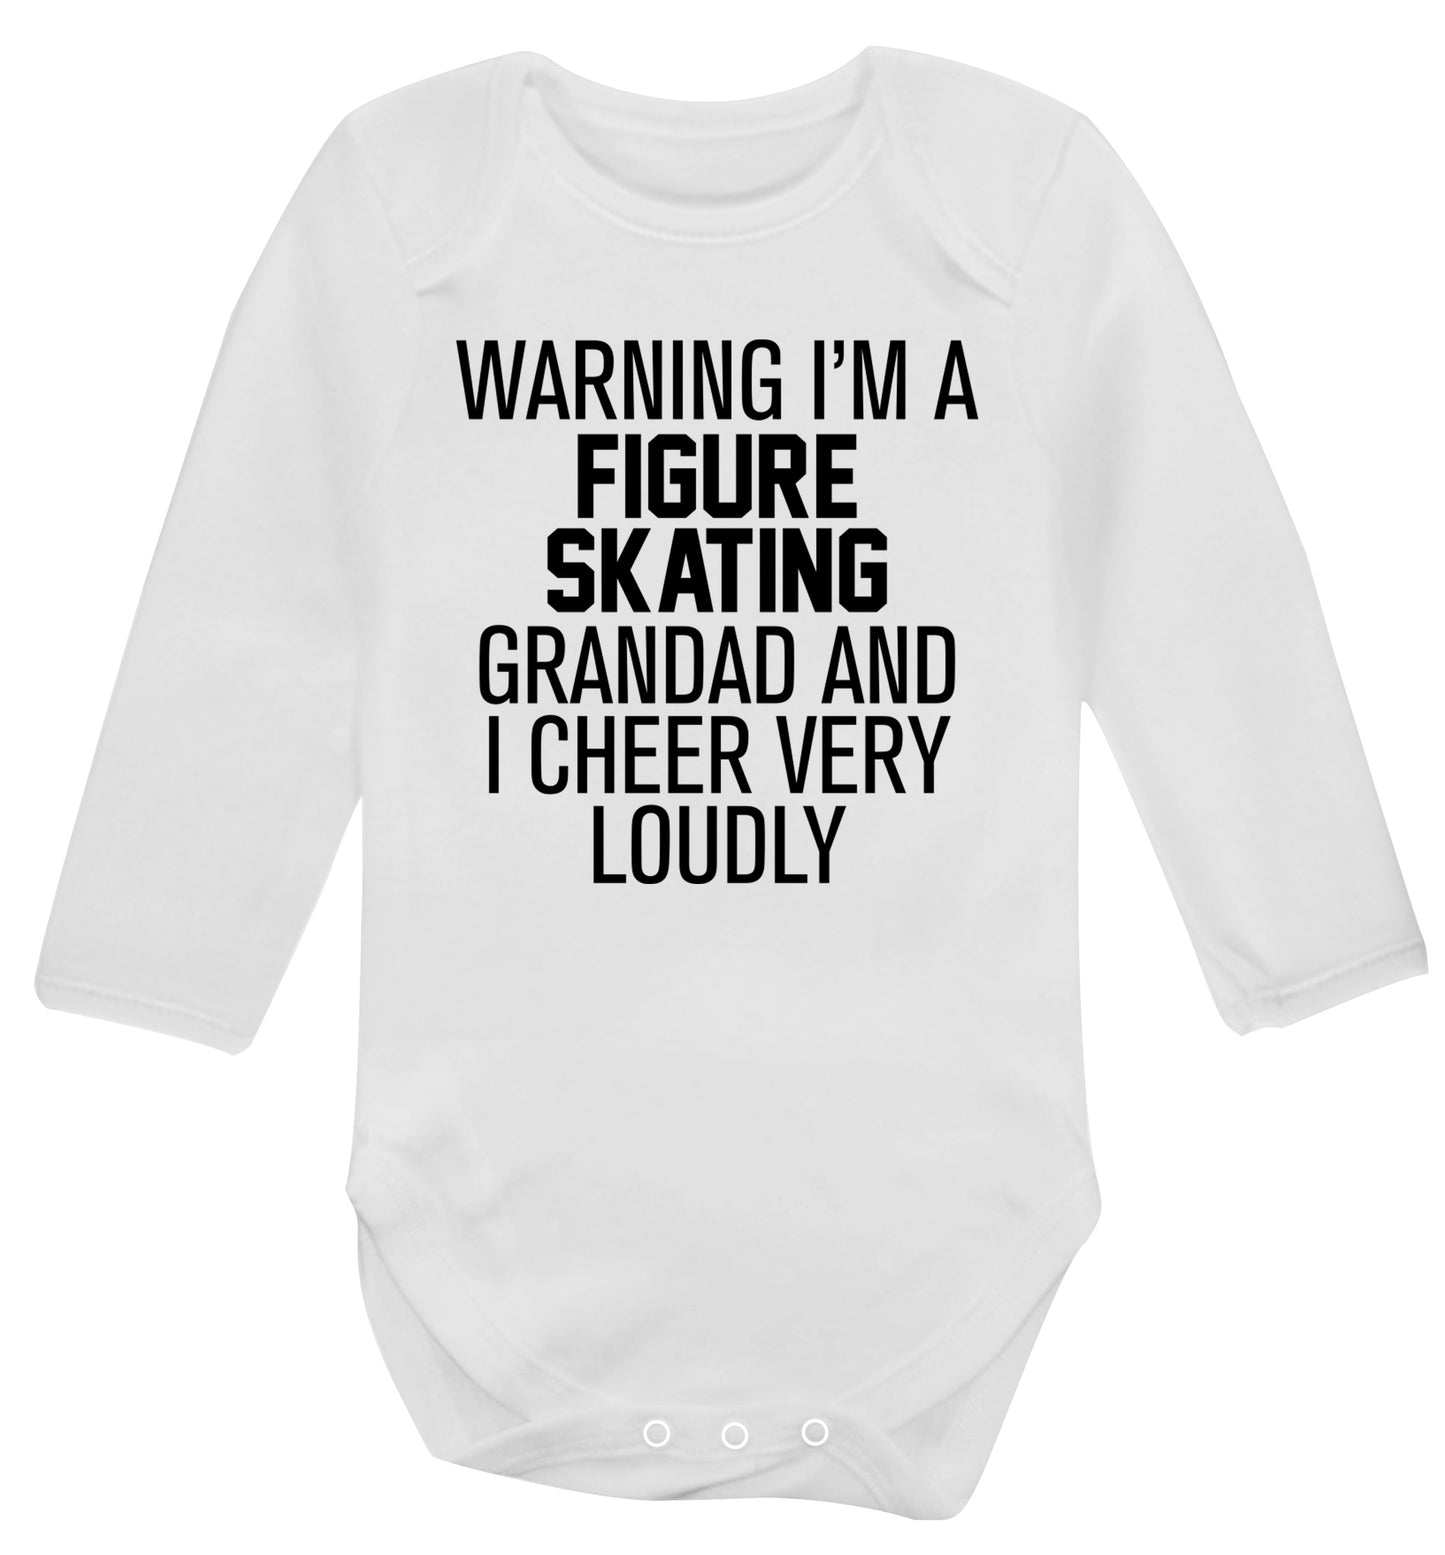 Warning I'm a figure skating grandad and I cheer very loudly Baby Vest long sleeved white 6-12 months